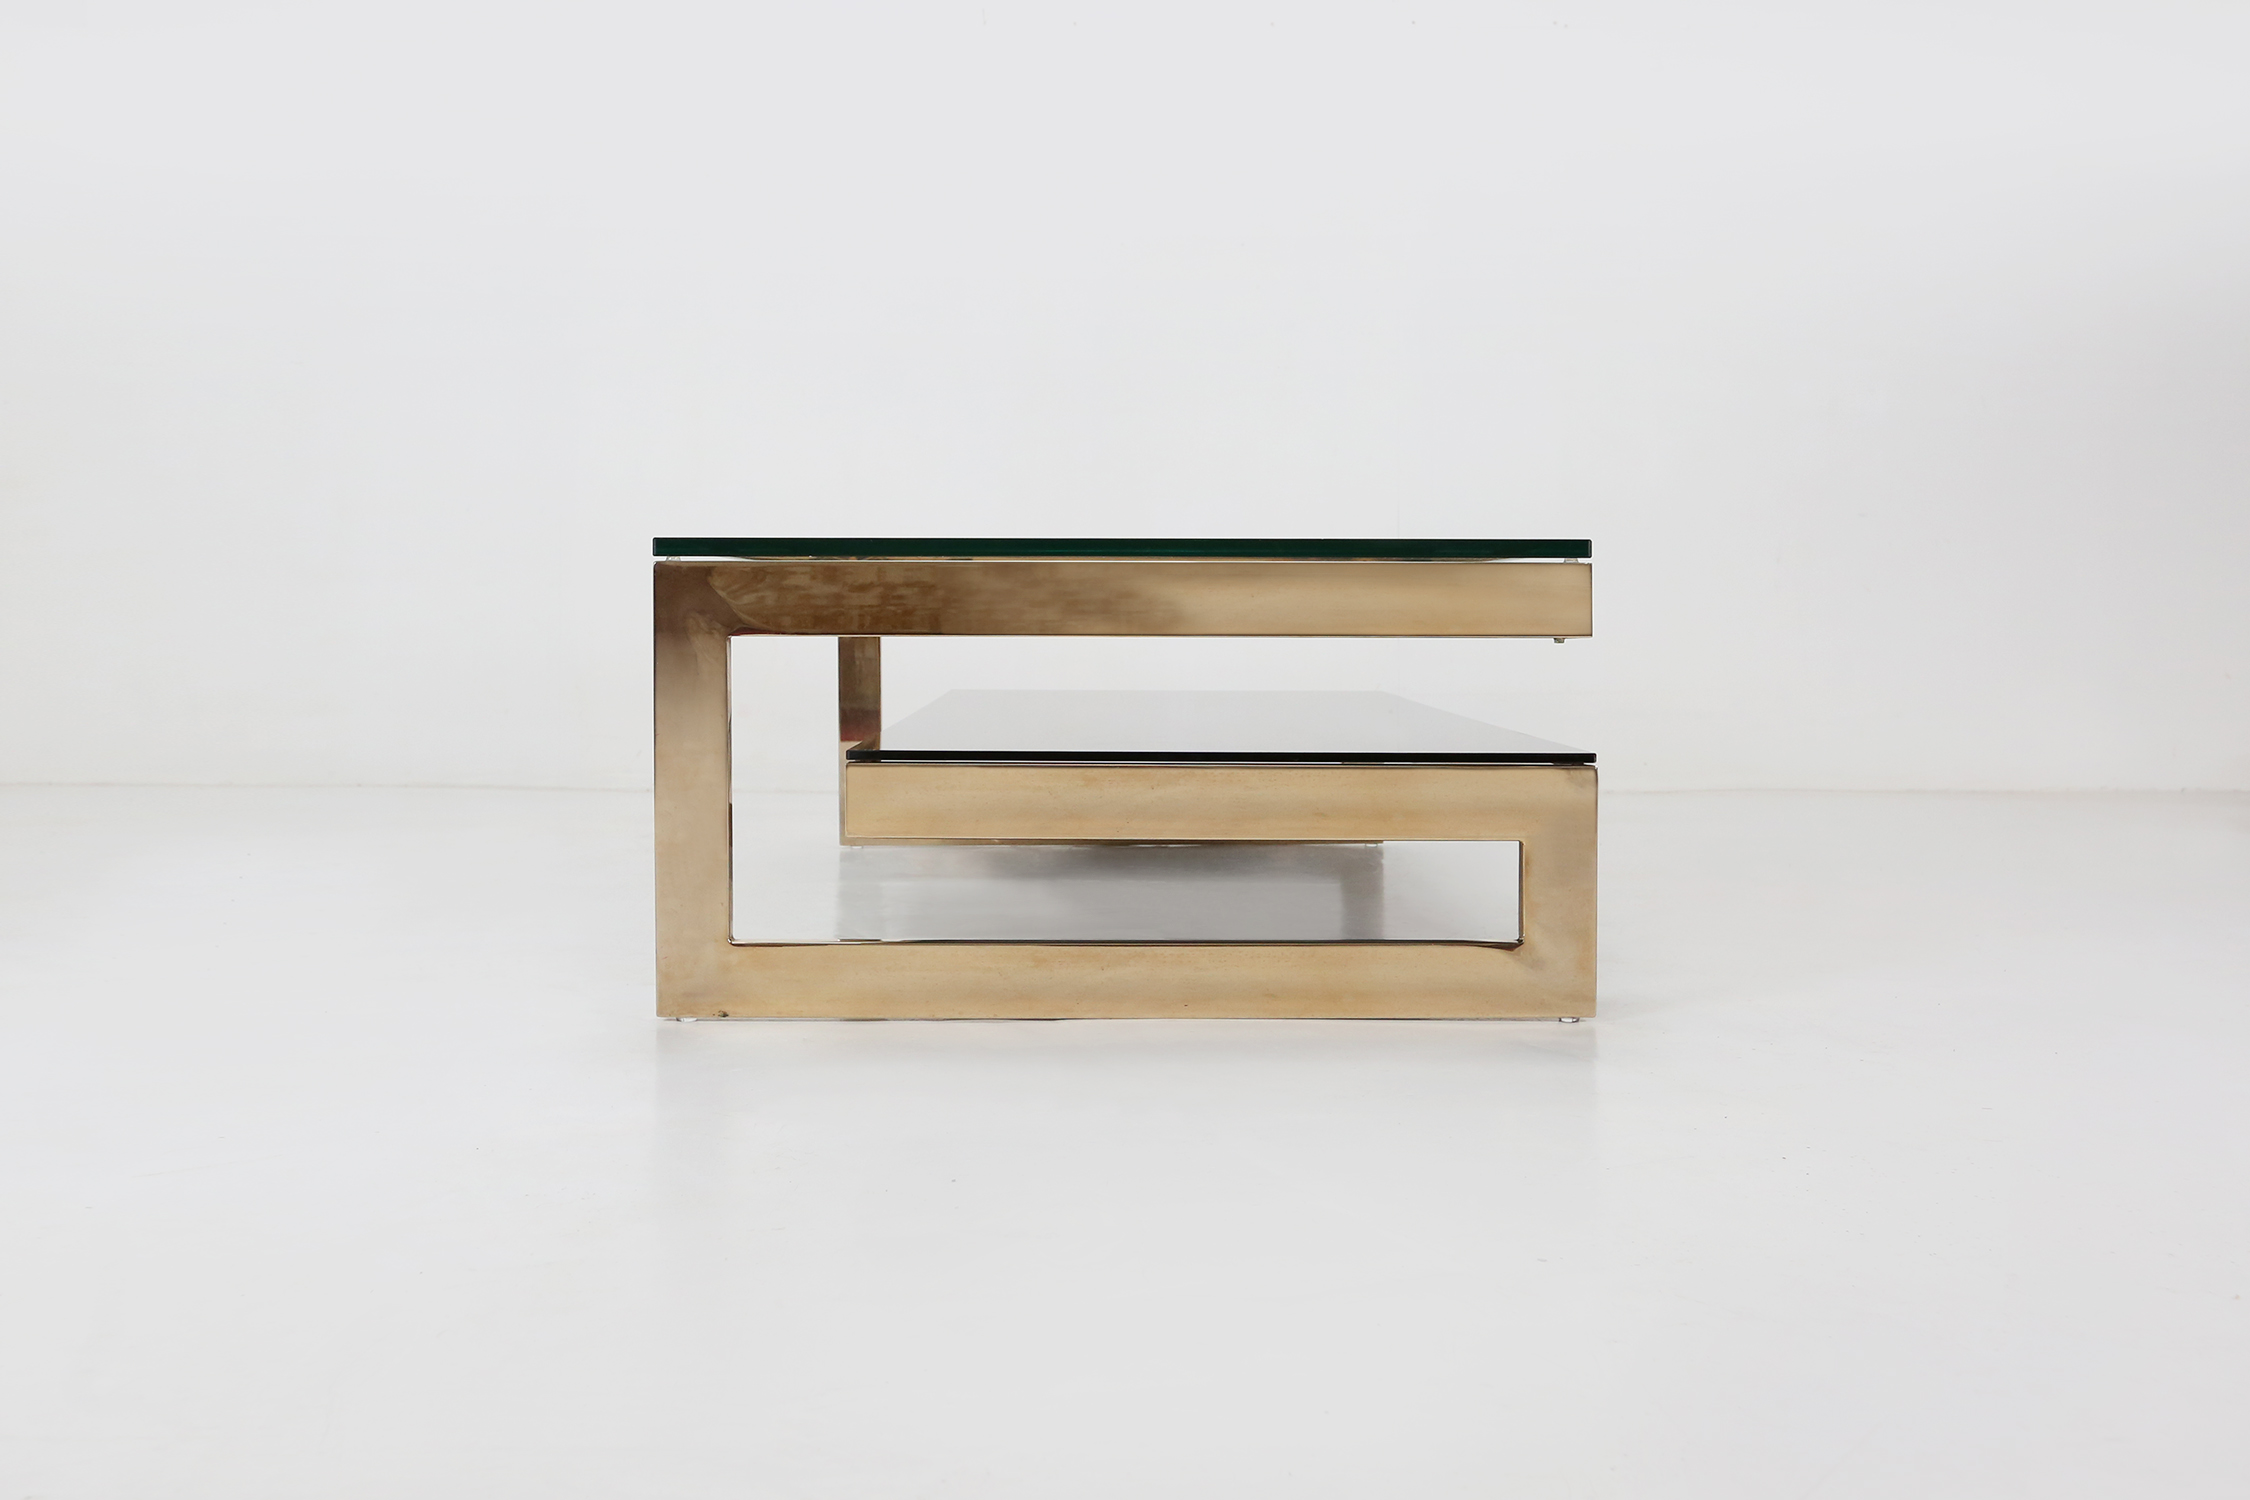 23 kt gold leaf G-shaped coffee table by Belgo Chrome